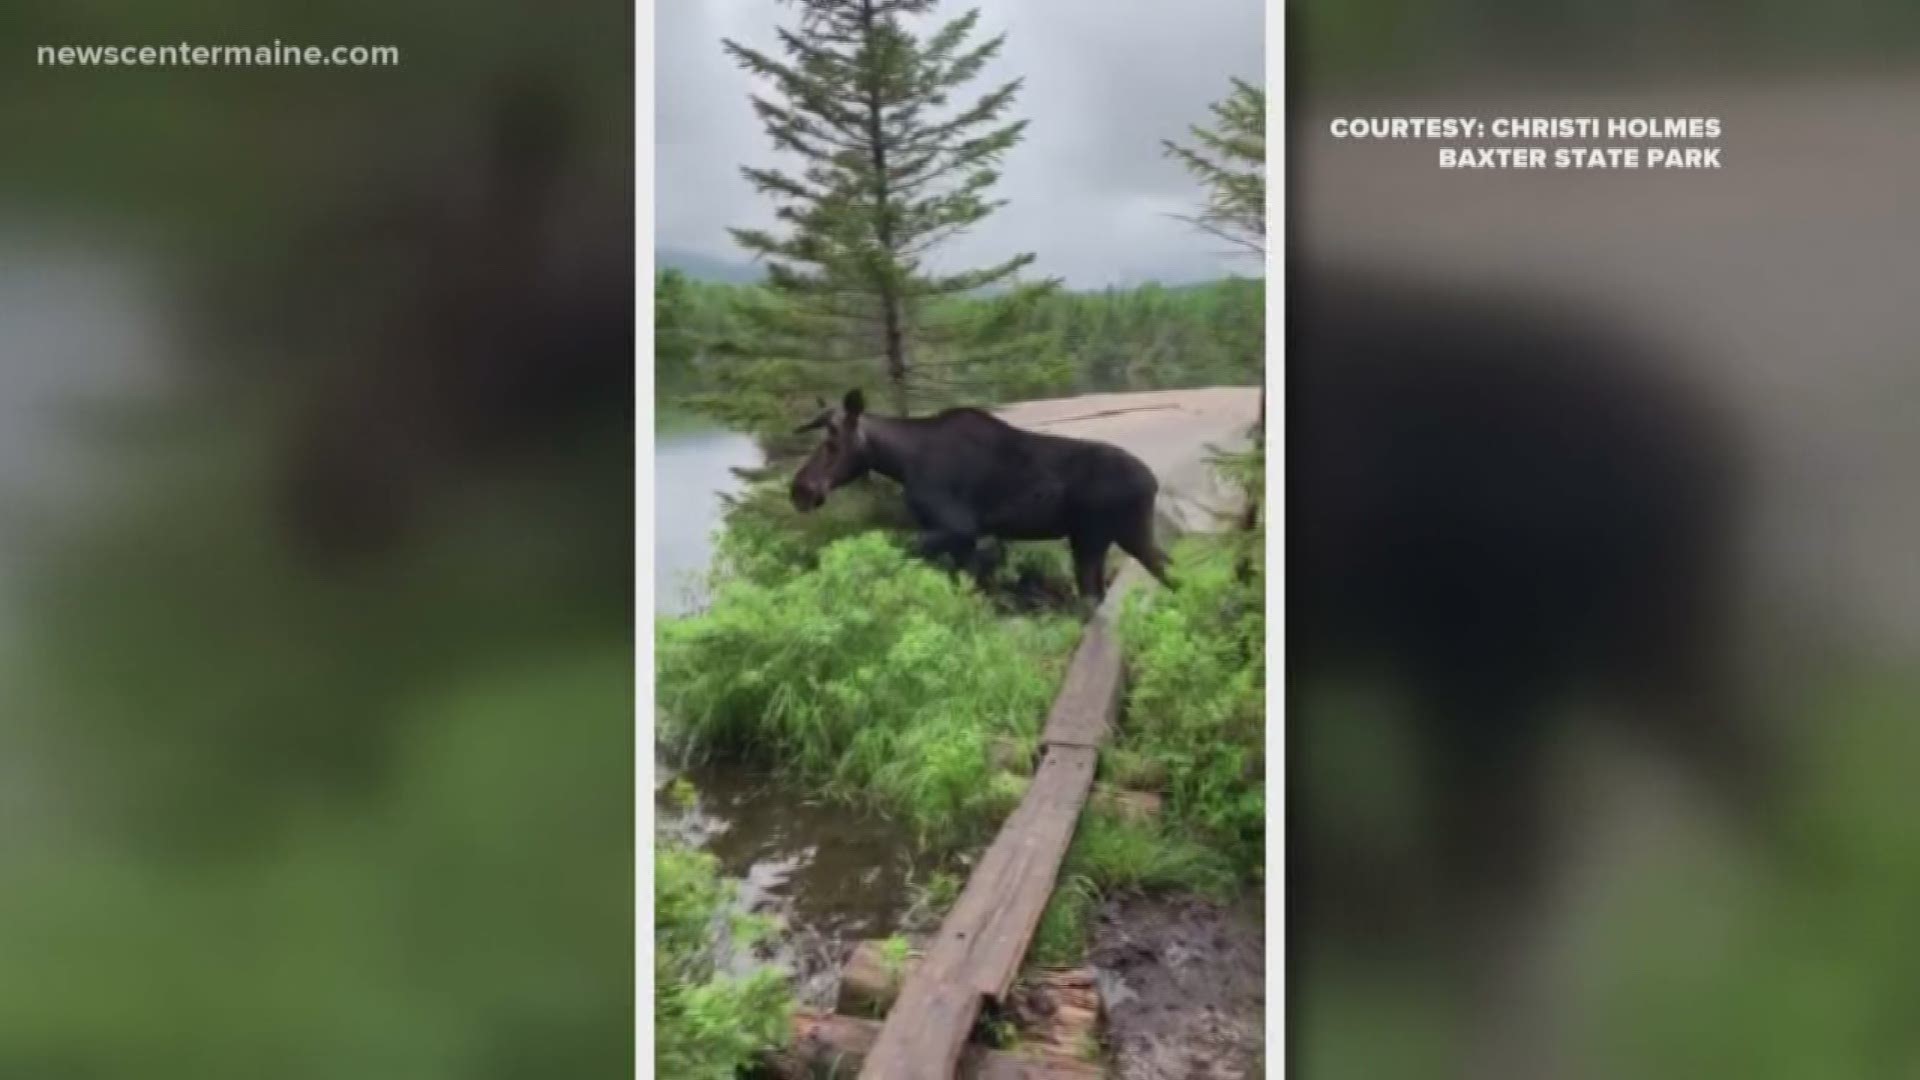 Christi Holmes says she had a close encounter with a large bull moose in Baxter State Park.